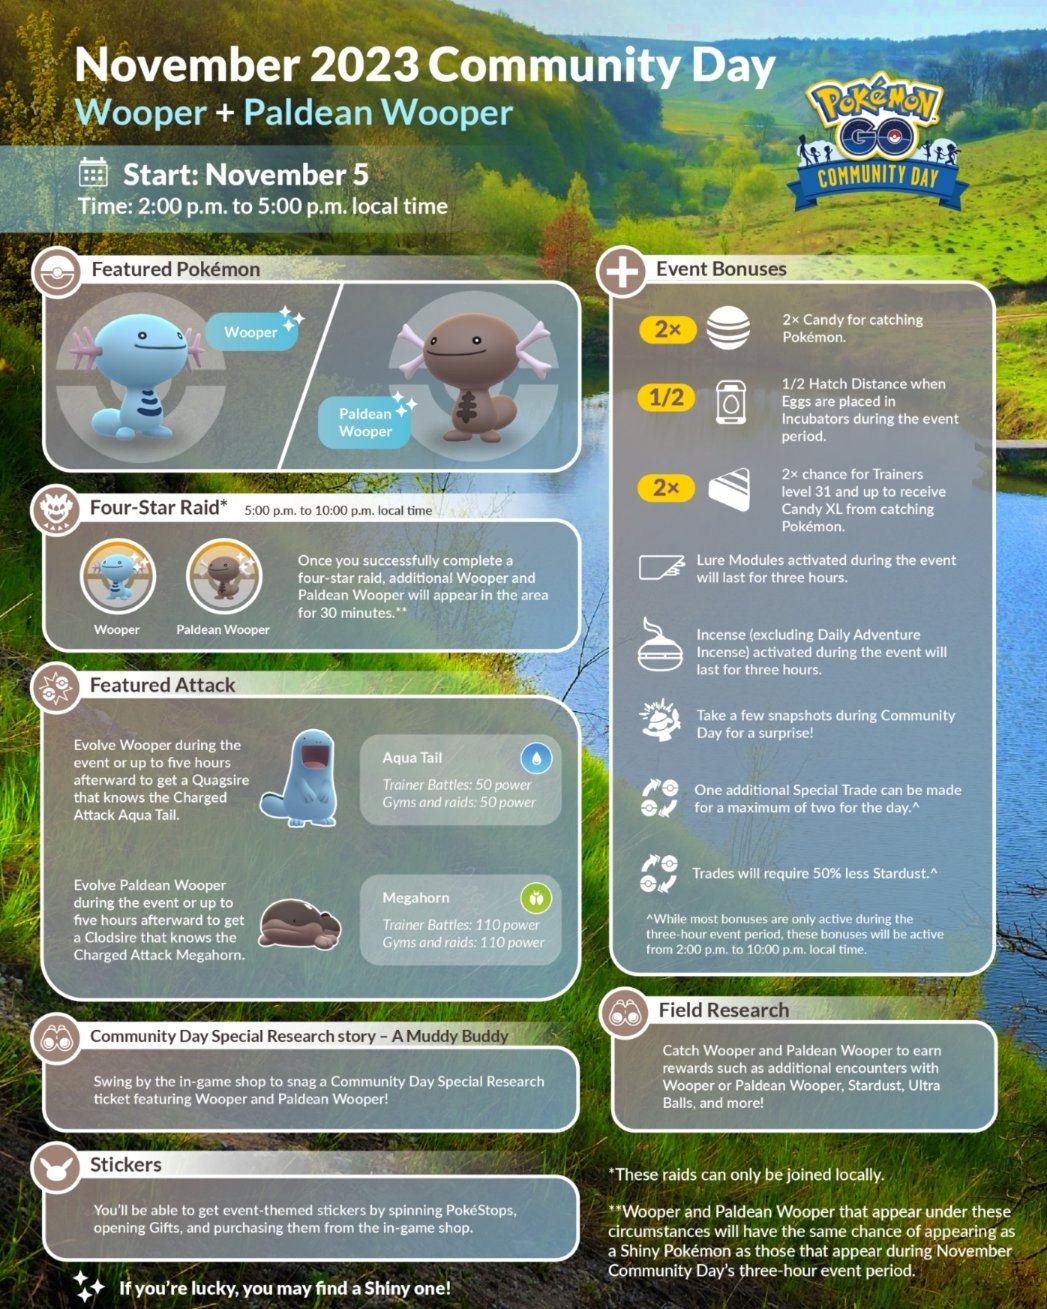 Pokémon GO Community Day - Wooper and Paldean Wooper - Infographic